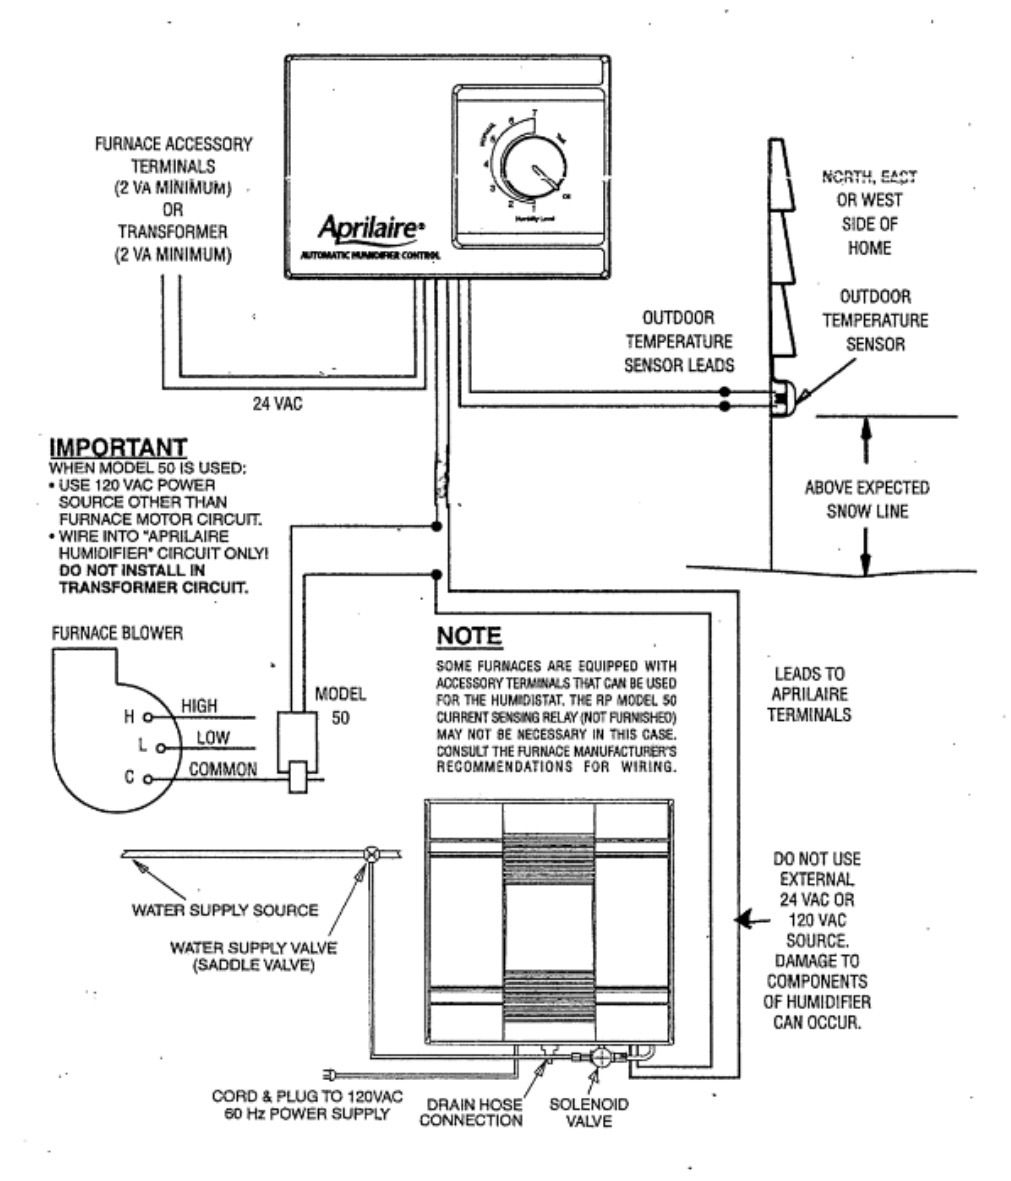 Heating - Wiring Aprilaire 700 Humidifier To York Tg9* Furnace - Aprilaire Humidifier Wiring Diagram